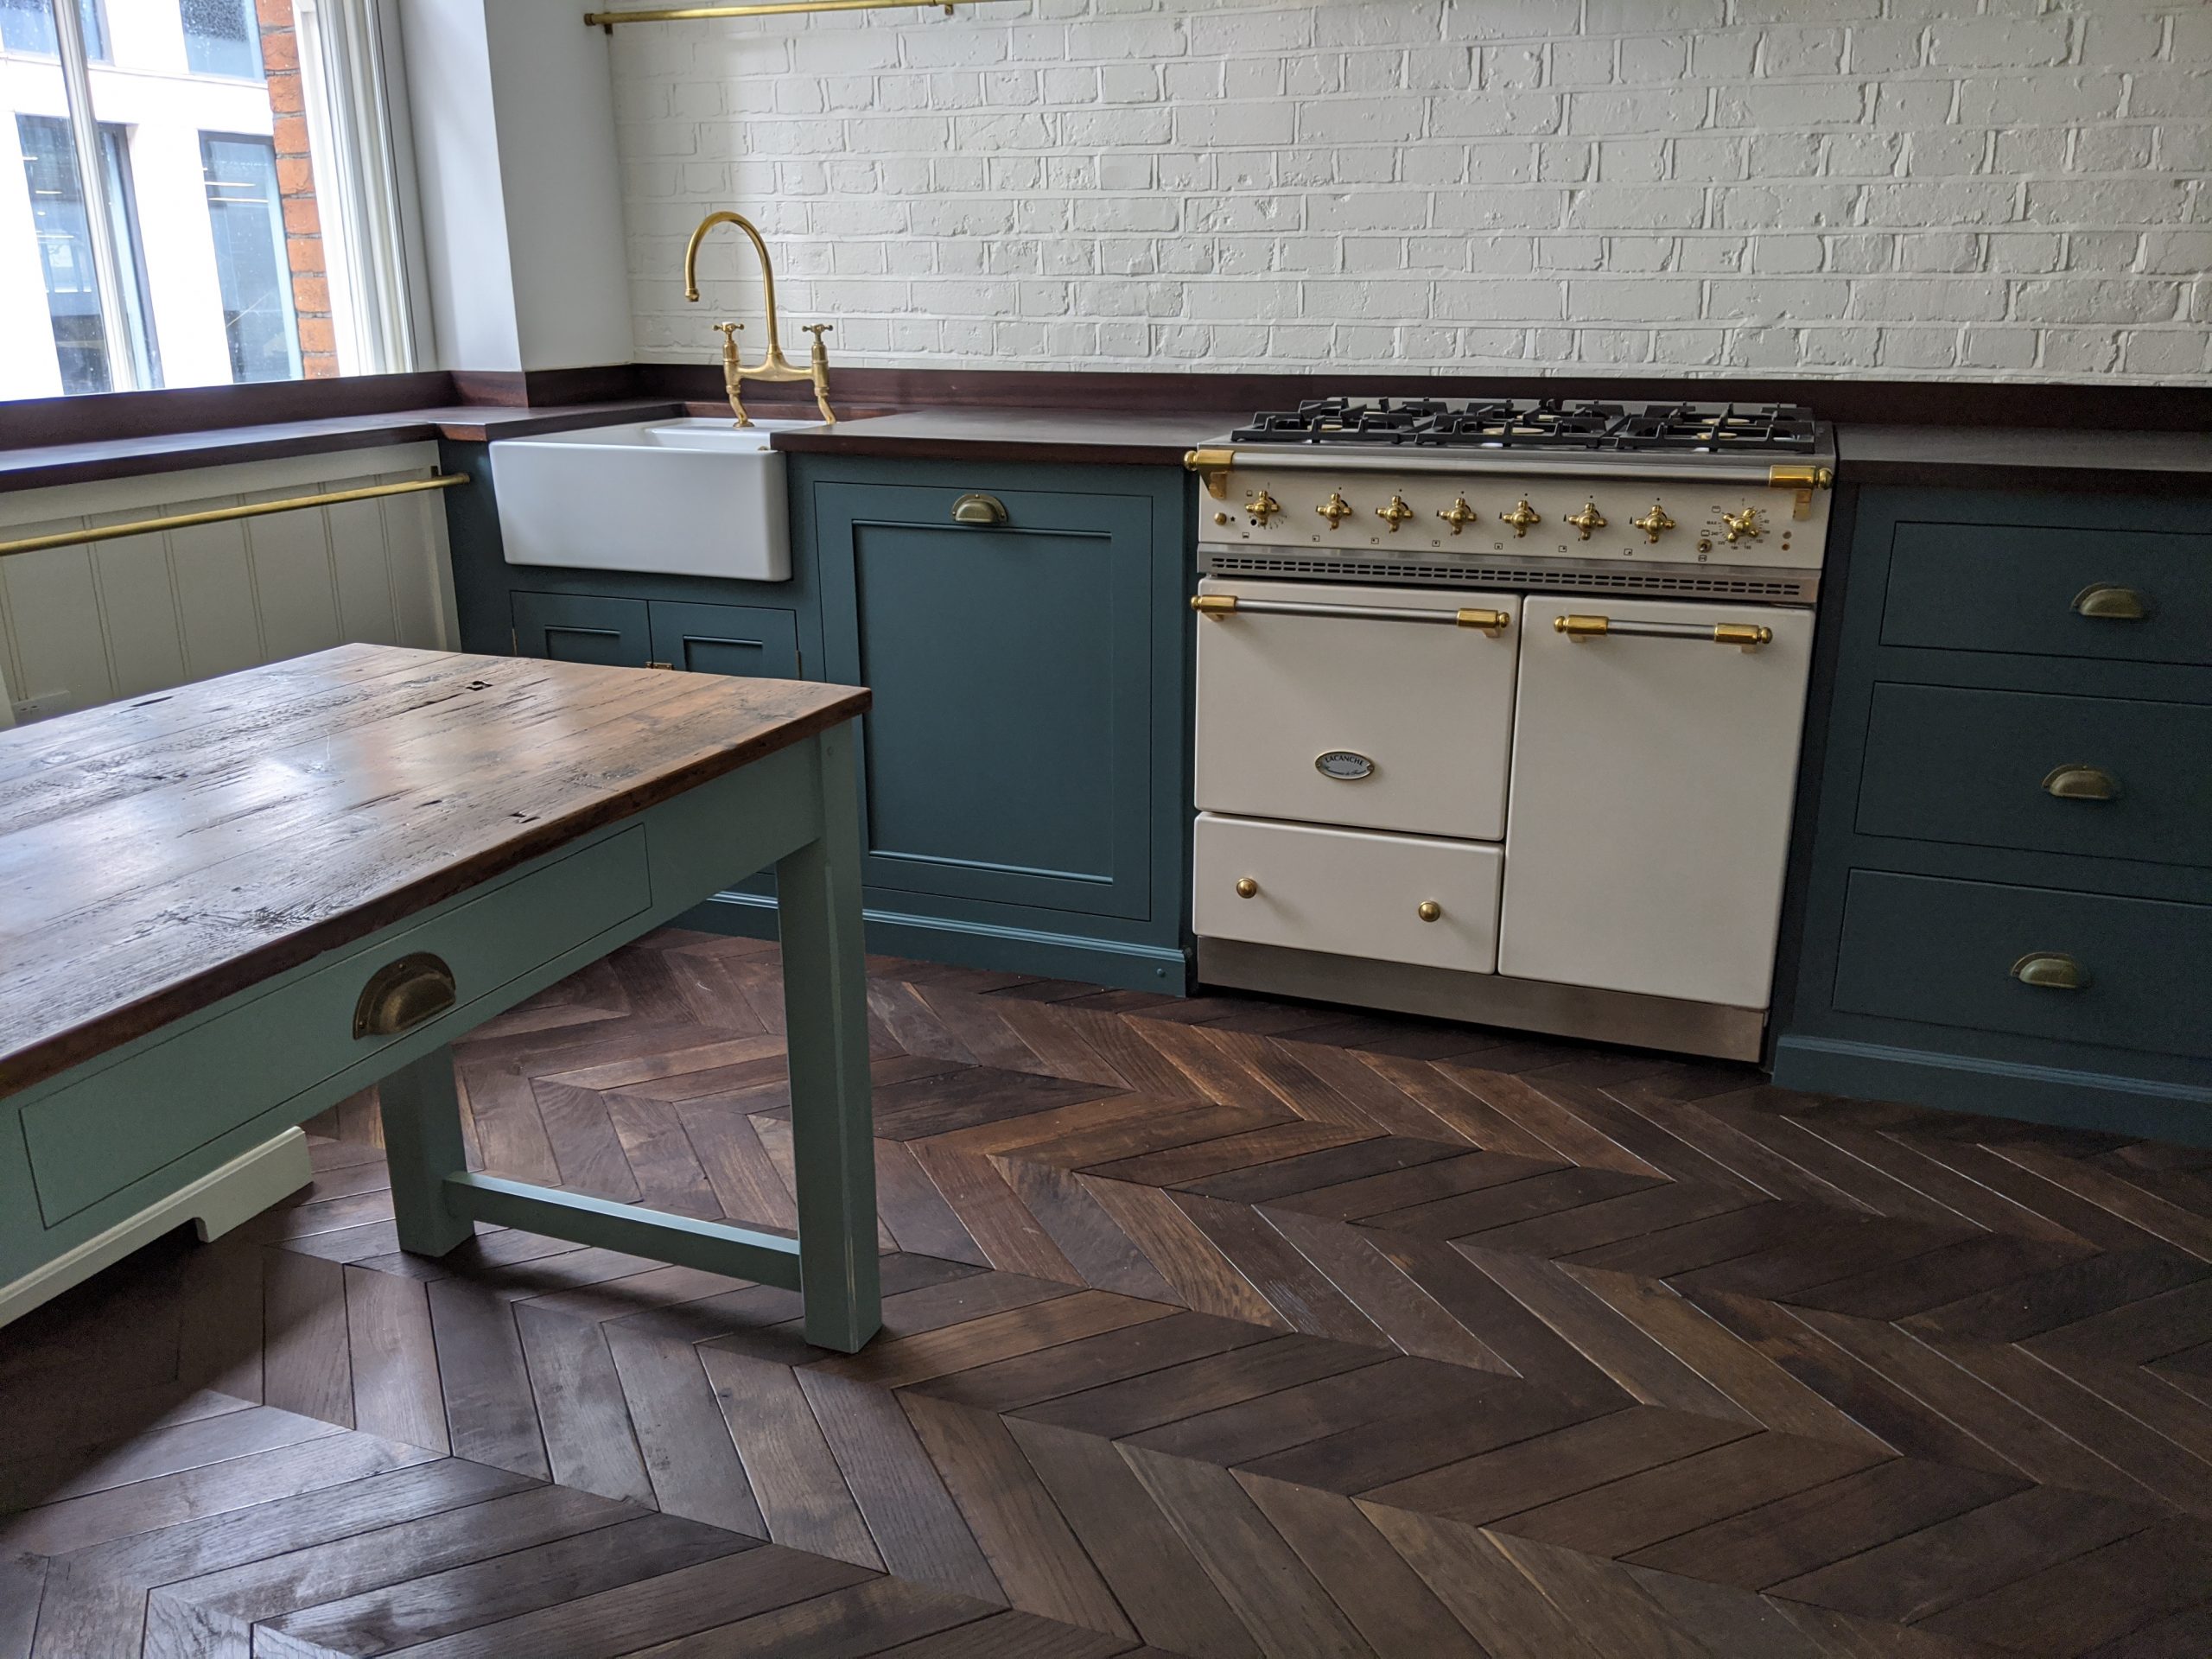 Parquet Flooring: What Exactly Is It? — How to Care for Parquet Flooring